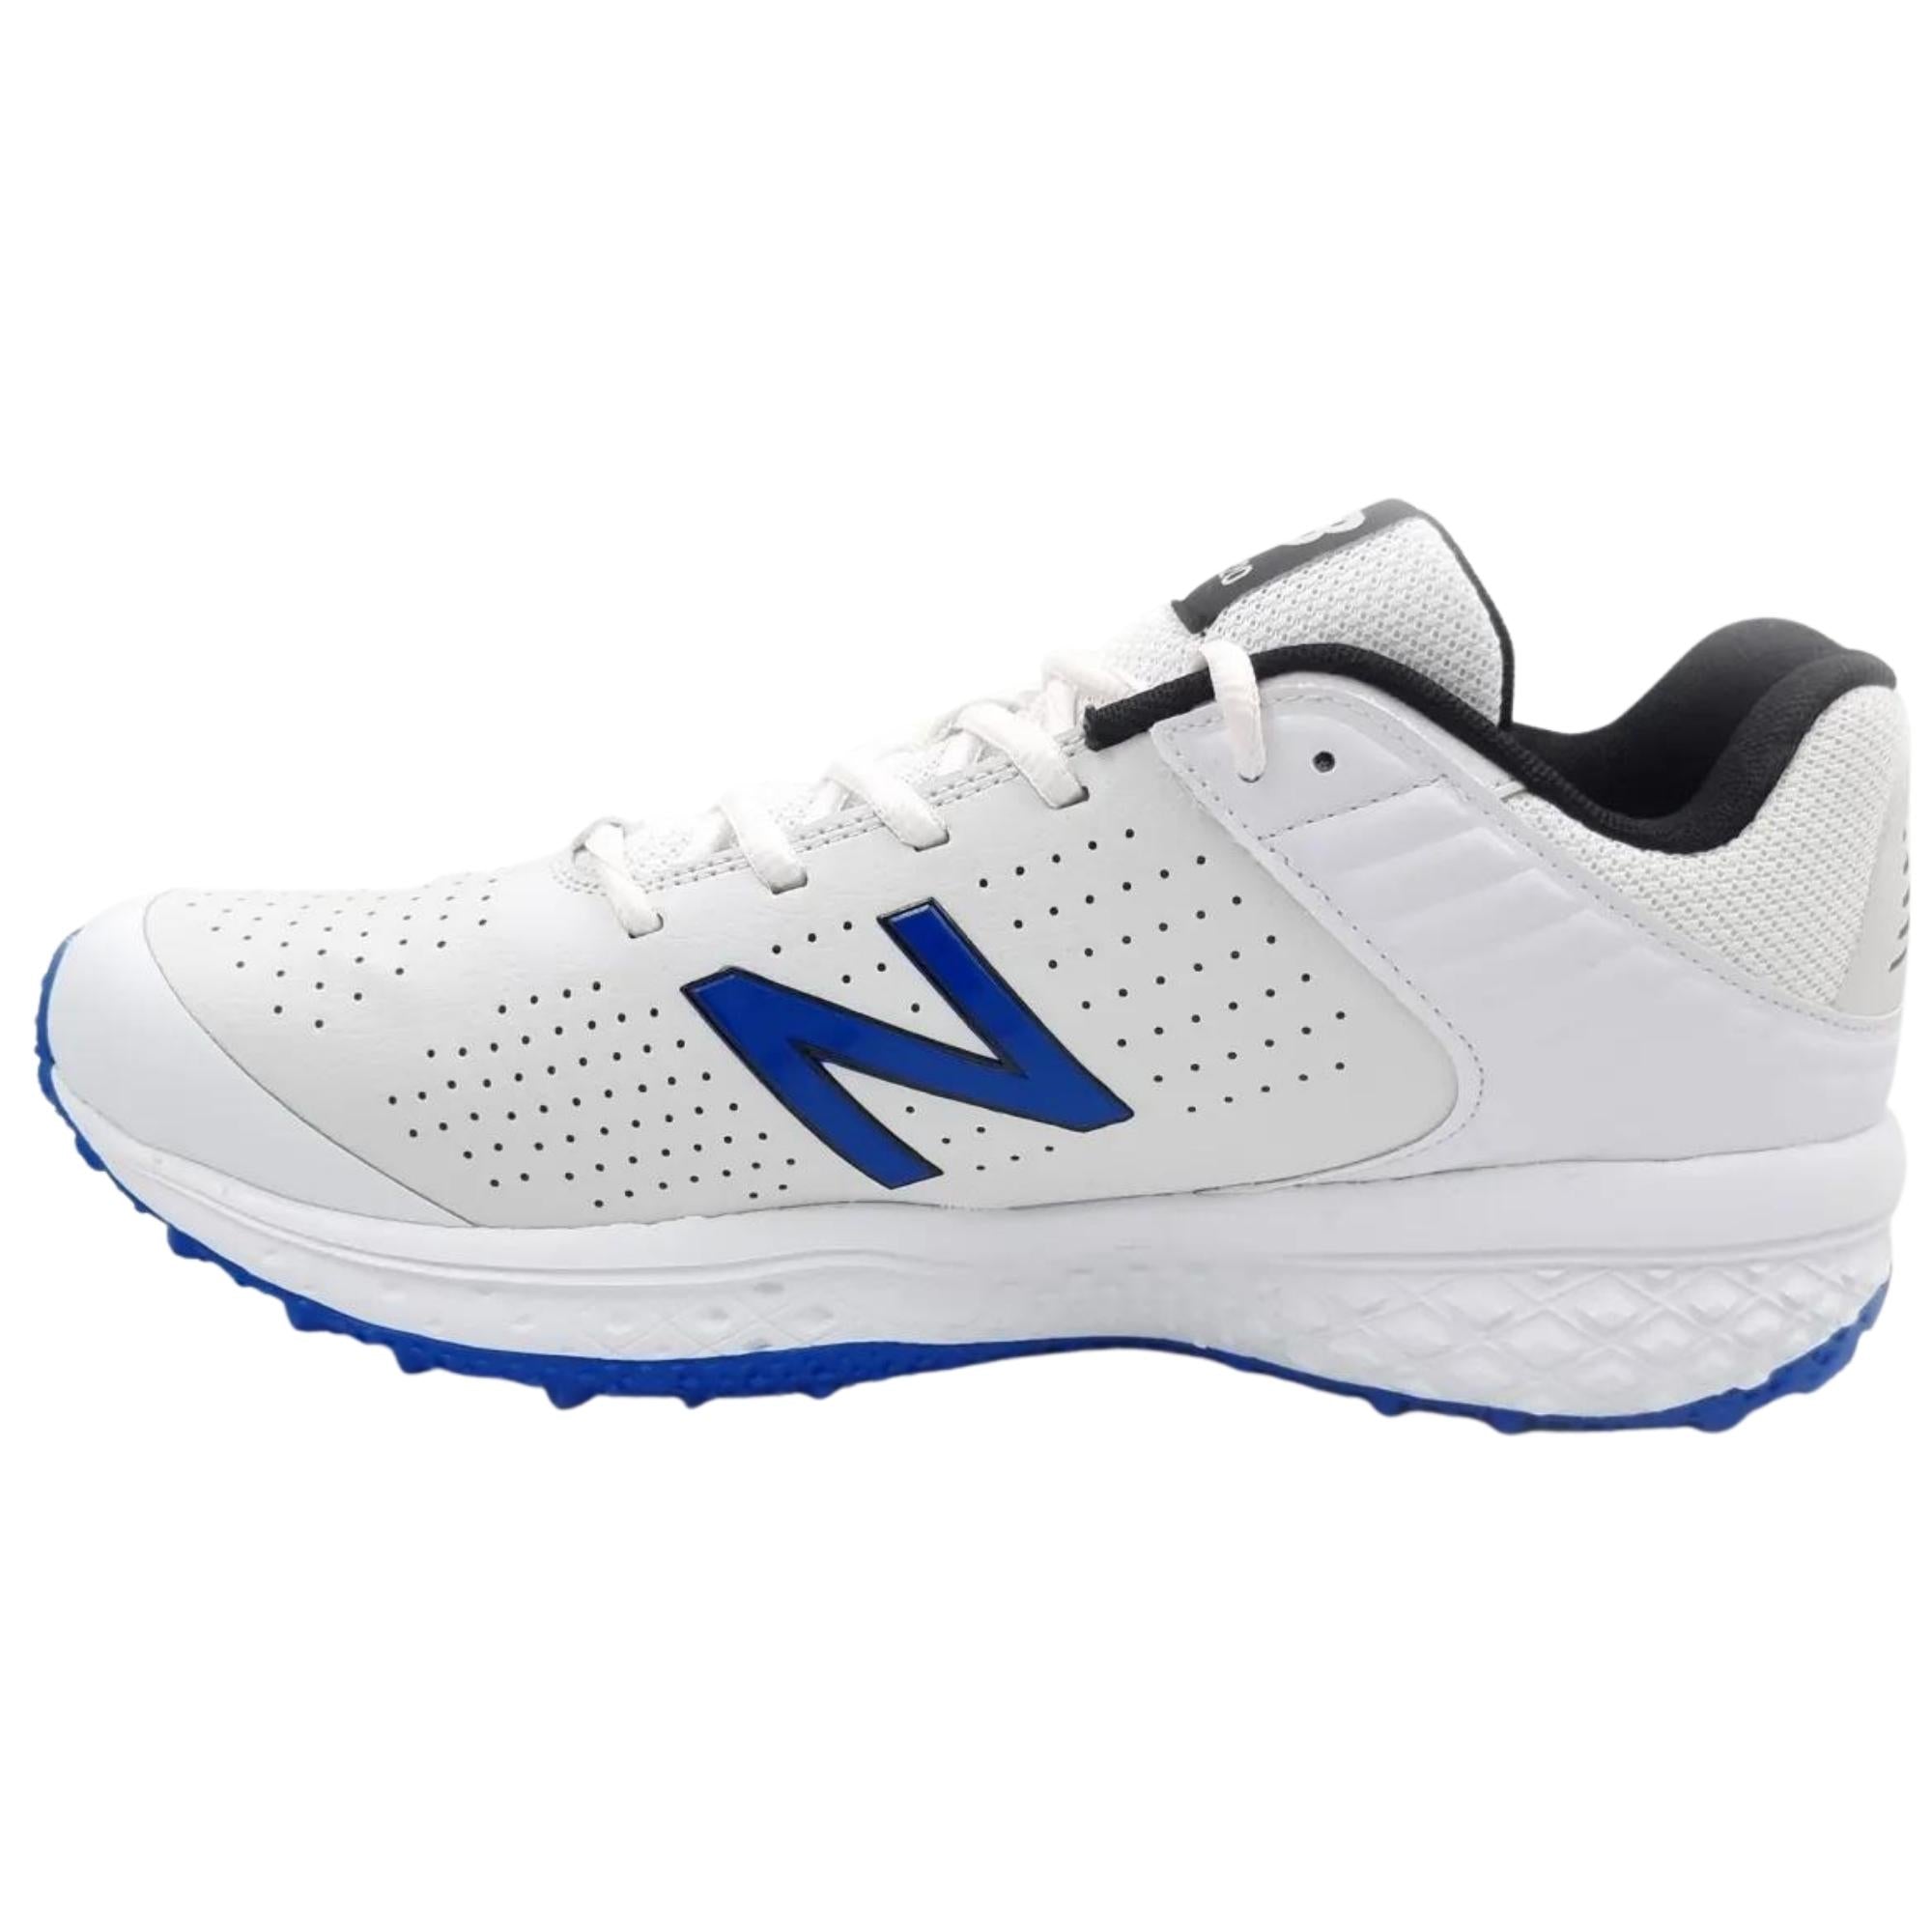 New Balance Cricket Shoes, Model CK4020 D4 Rubber Spikes - White